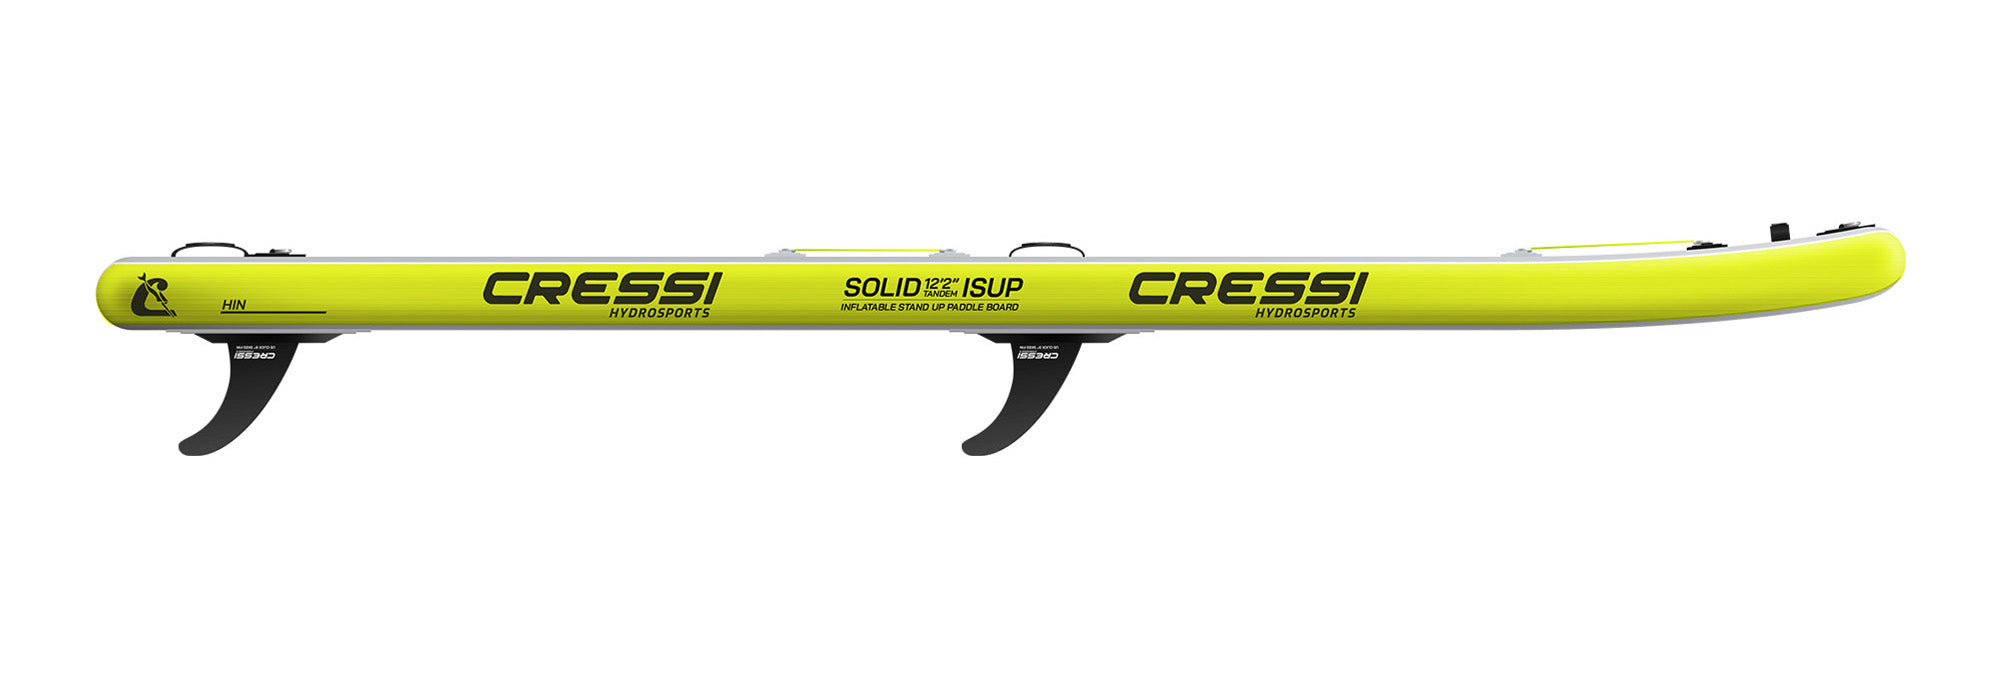 Cressi Solid Tandem Inflatable Stand Up Paddleboard Set